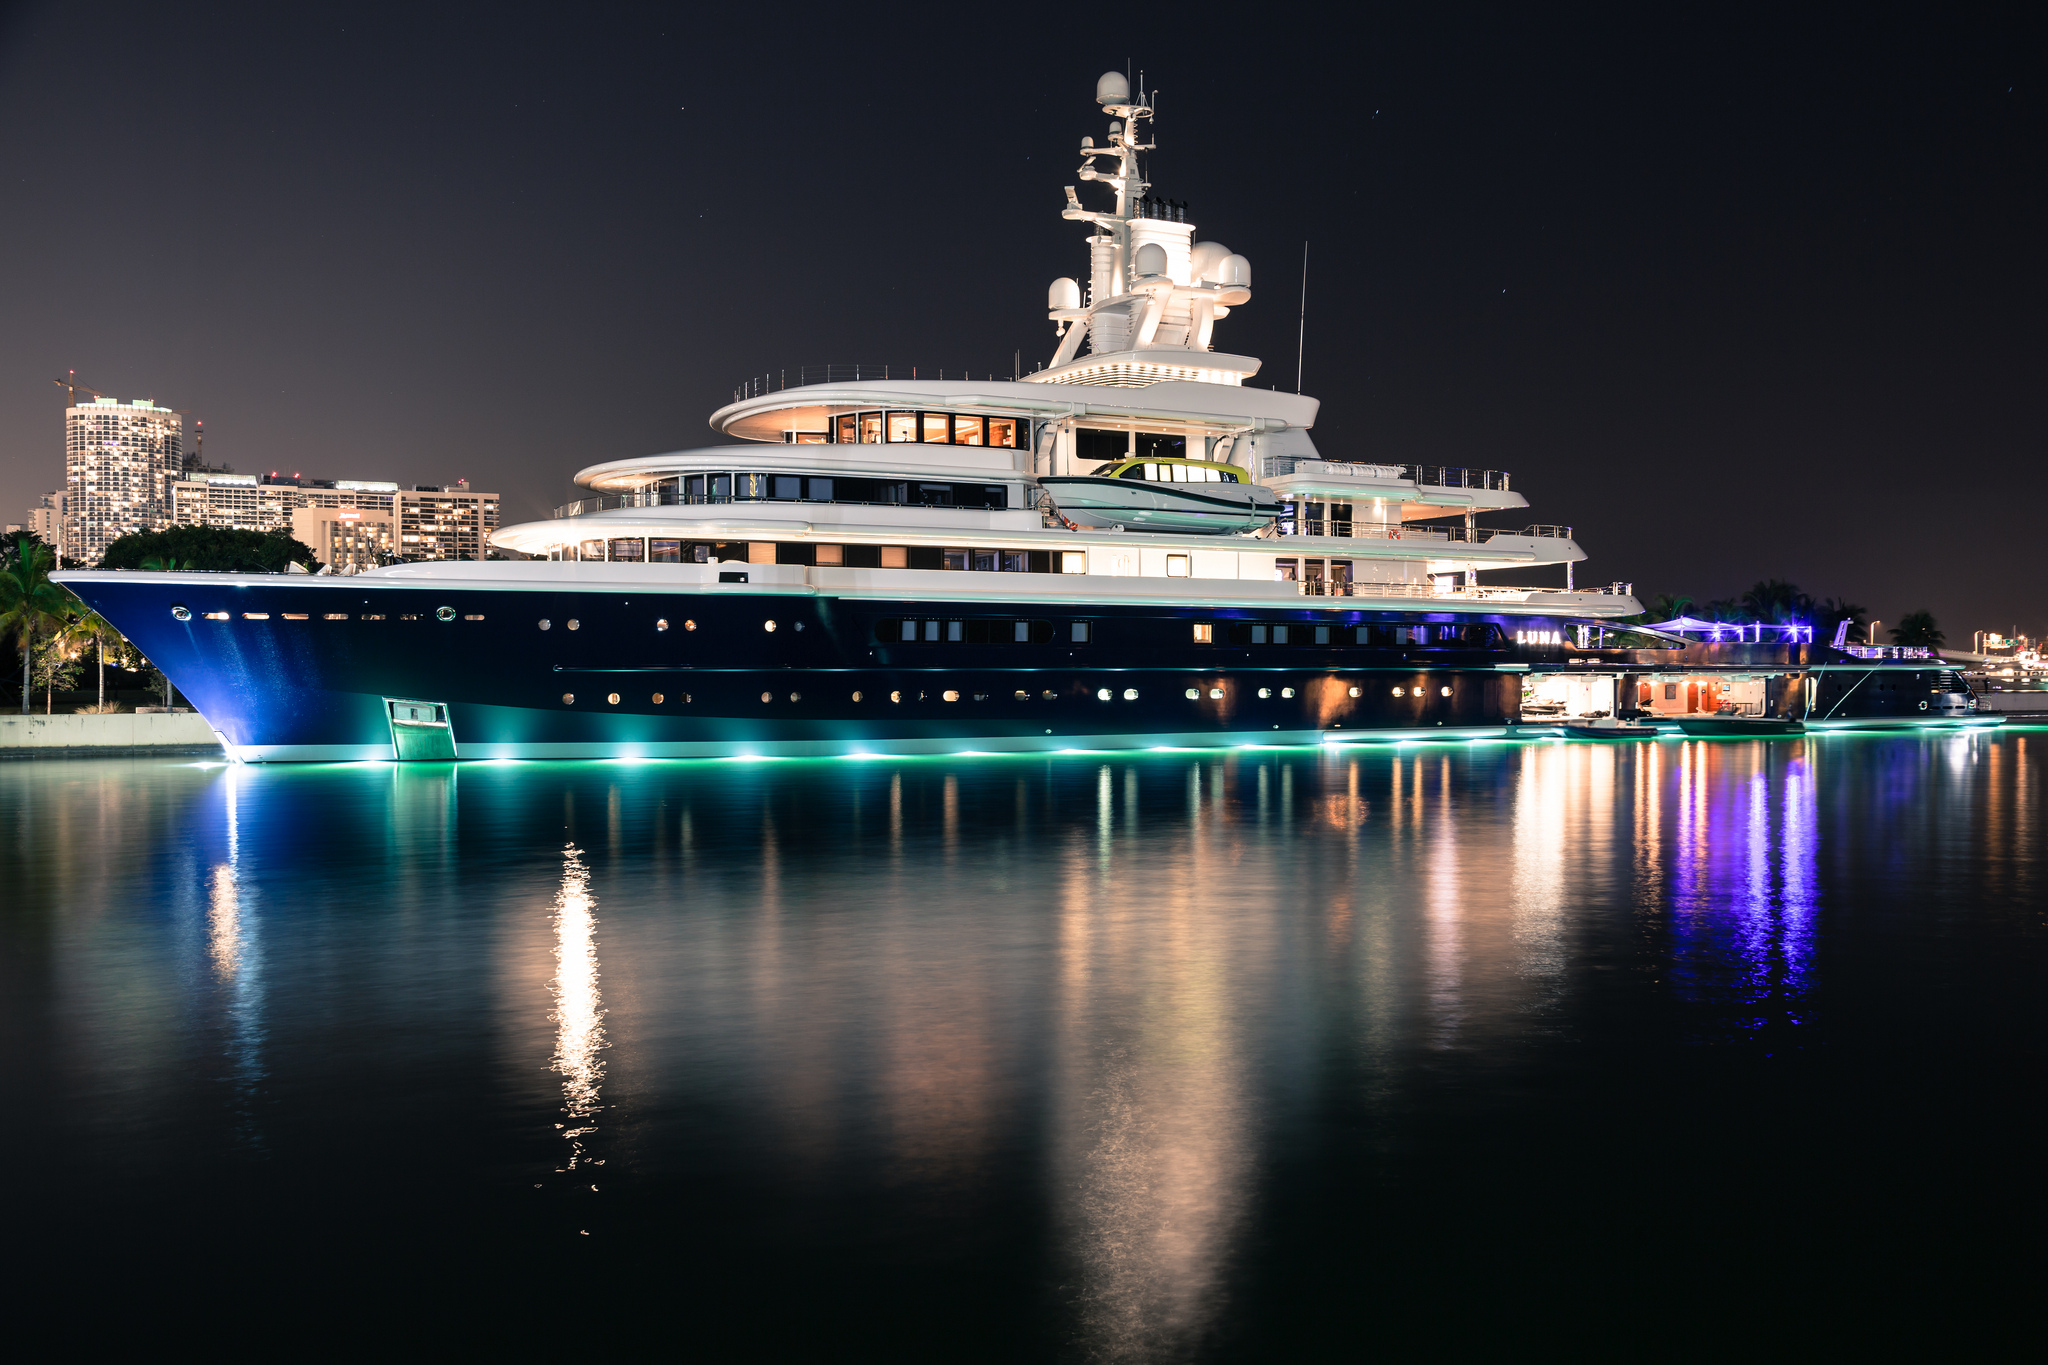 who owns the superyacht luna